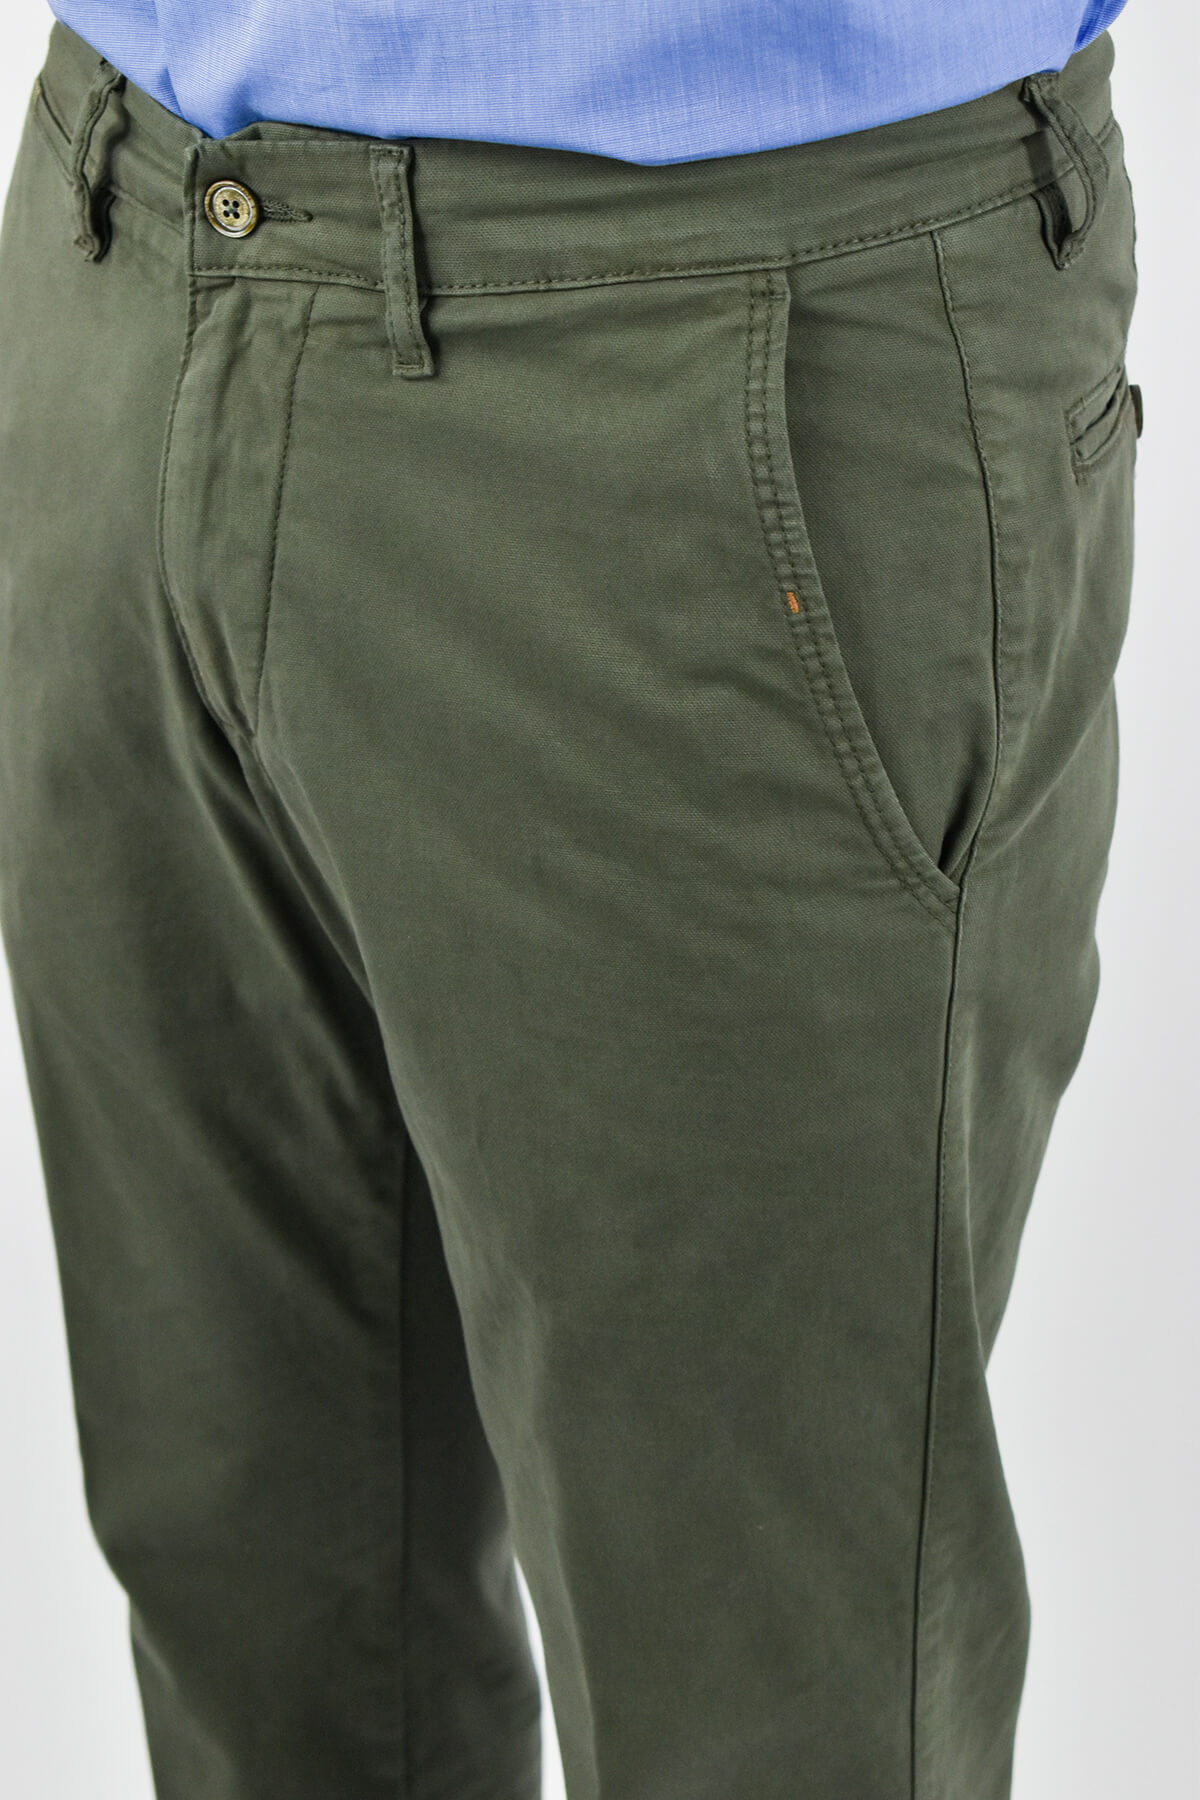 Lcdn Chinos Trousers Oporto Confort